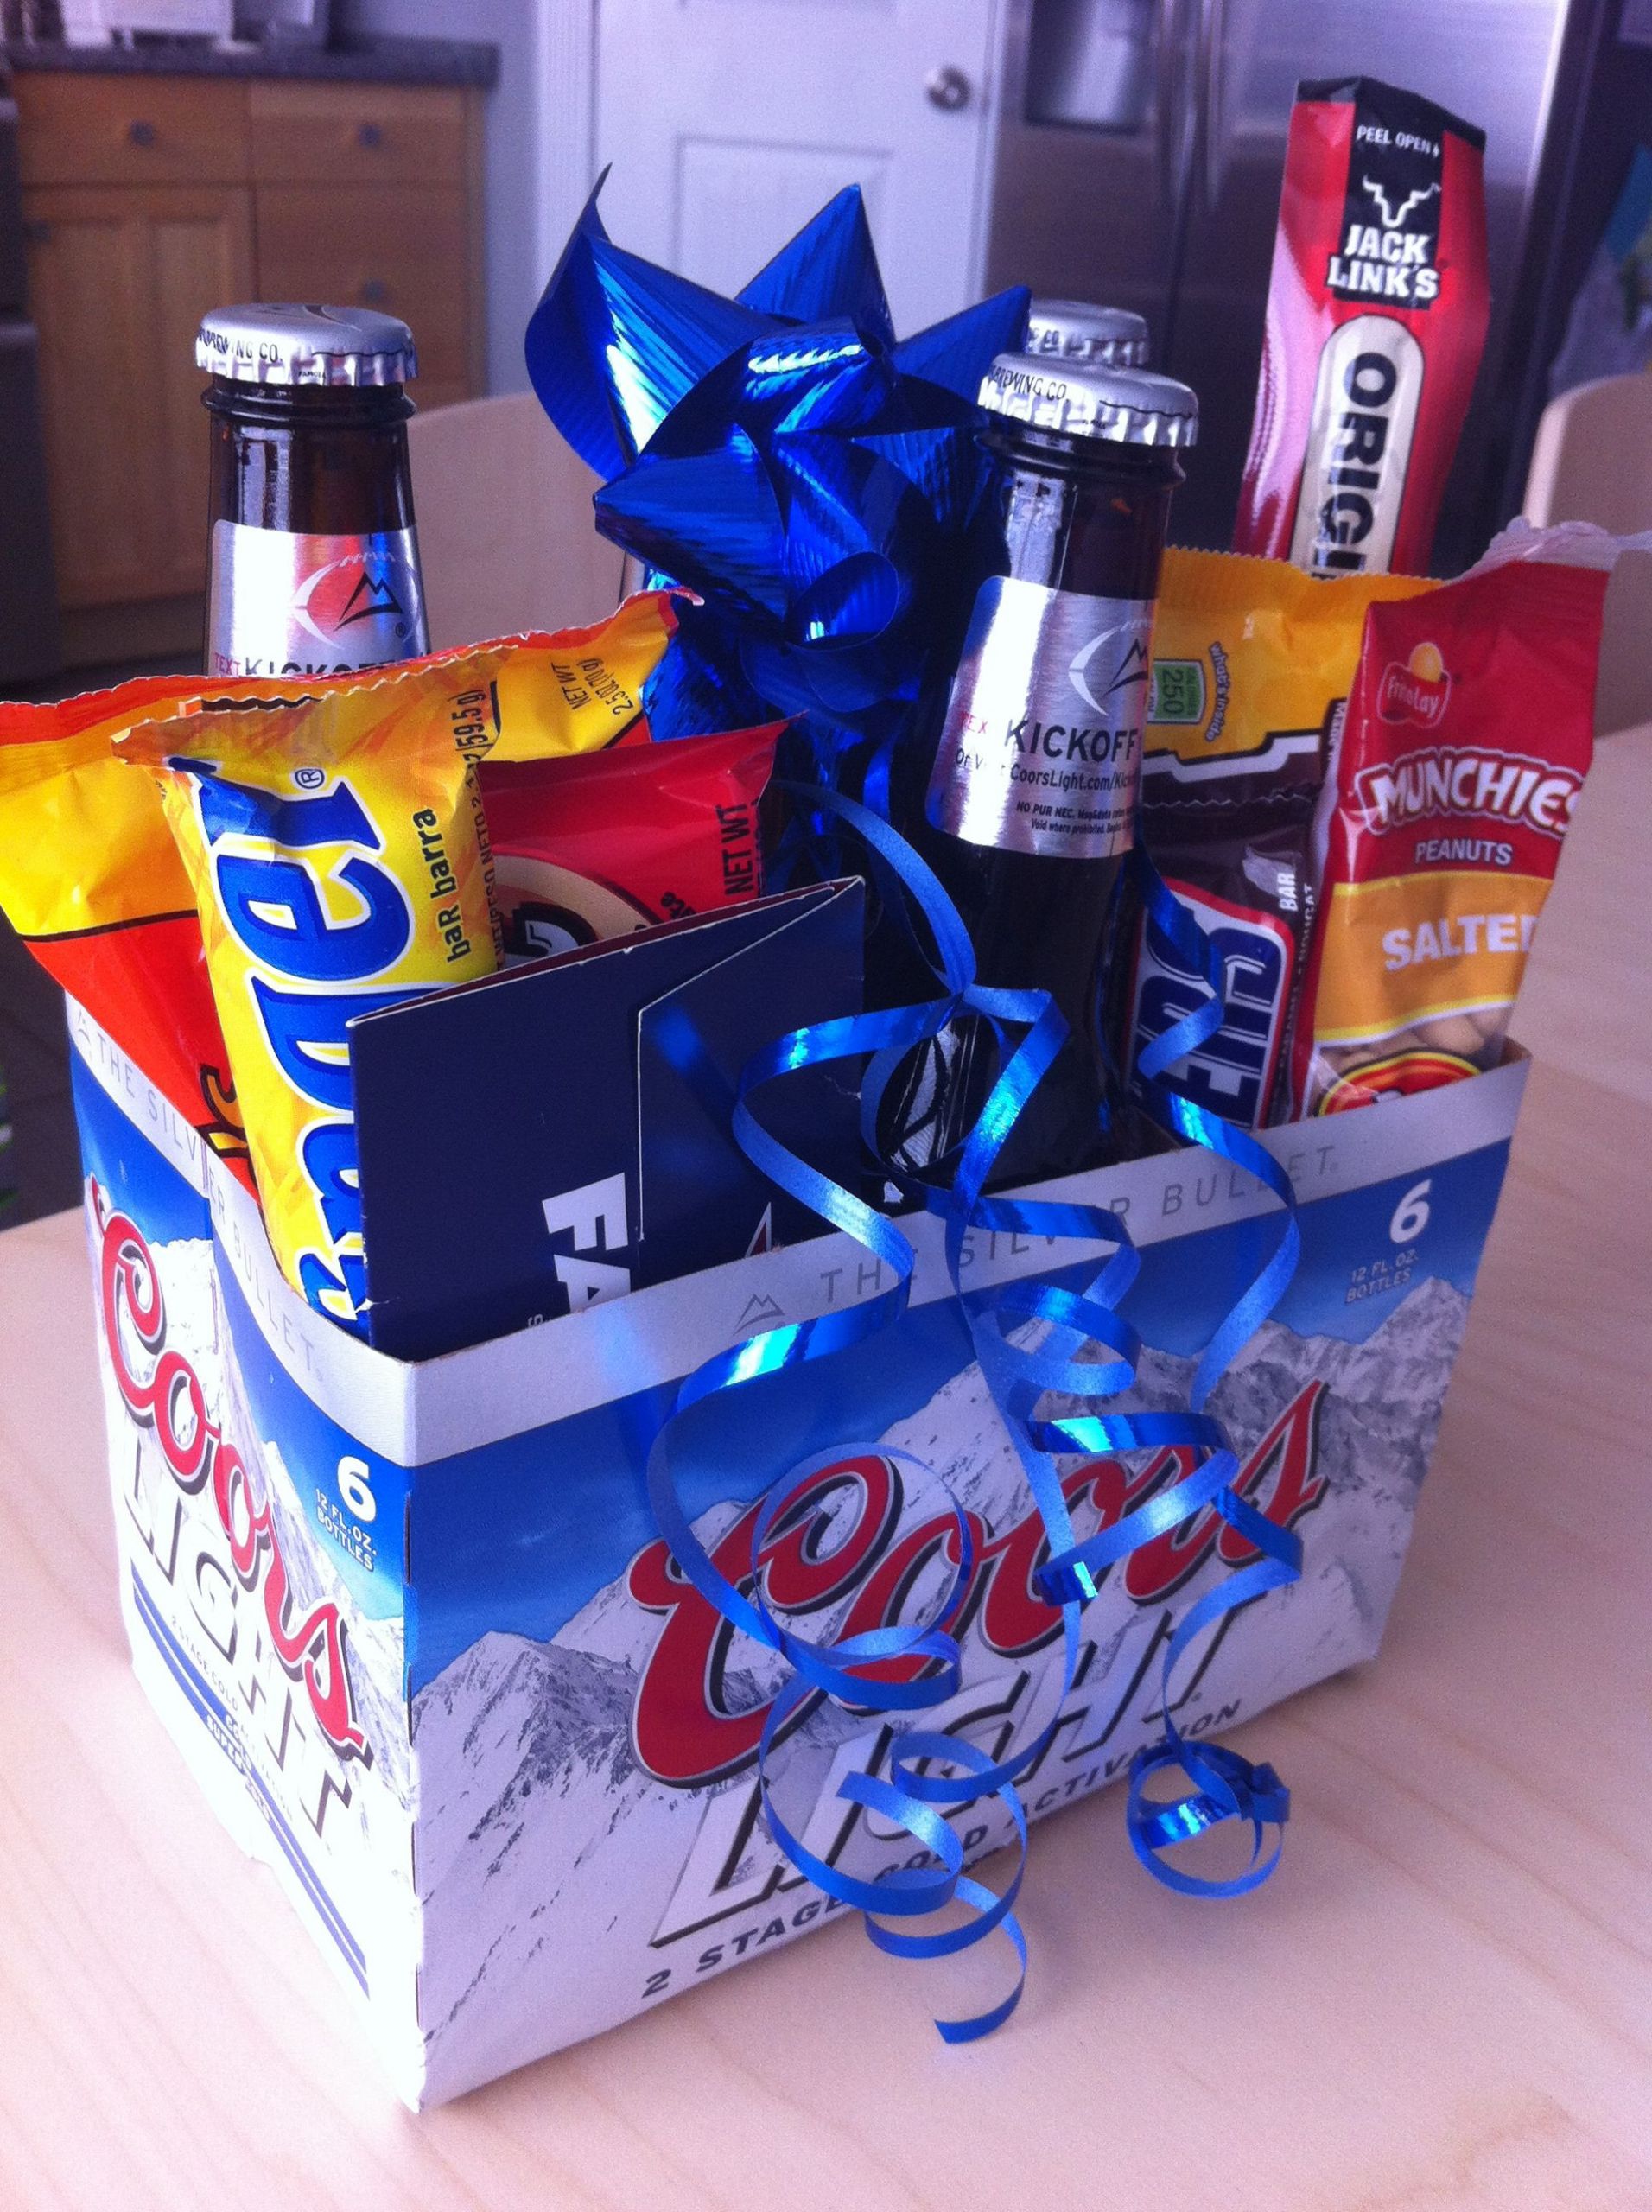 Manly Gift Baskets Ideas
 A Great Man Gift Gifts